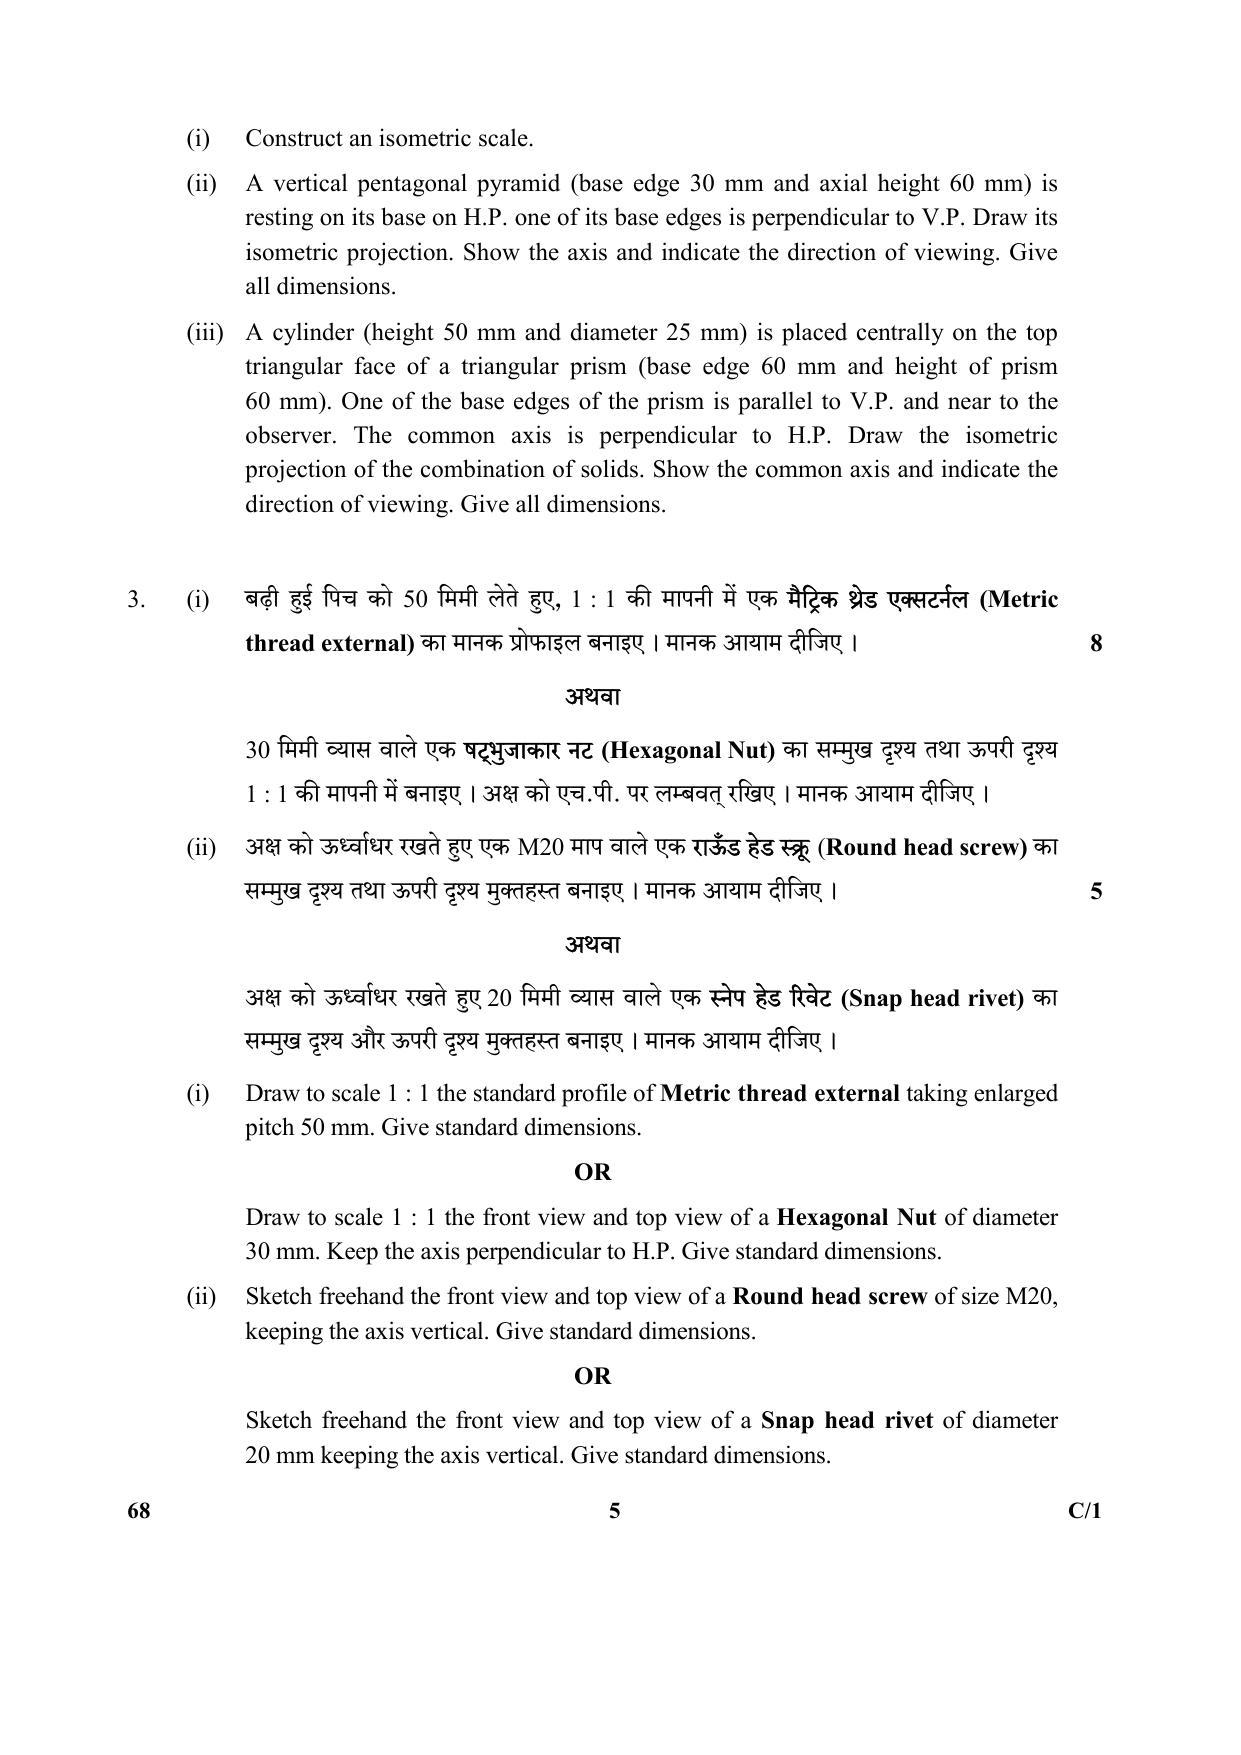 CBSE Class 12 68 (Engineering Graphics) 2018 Compartment Question Paper - Page 5